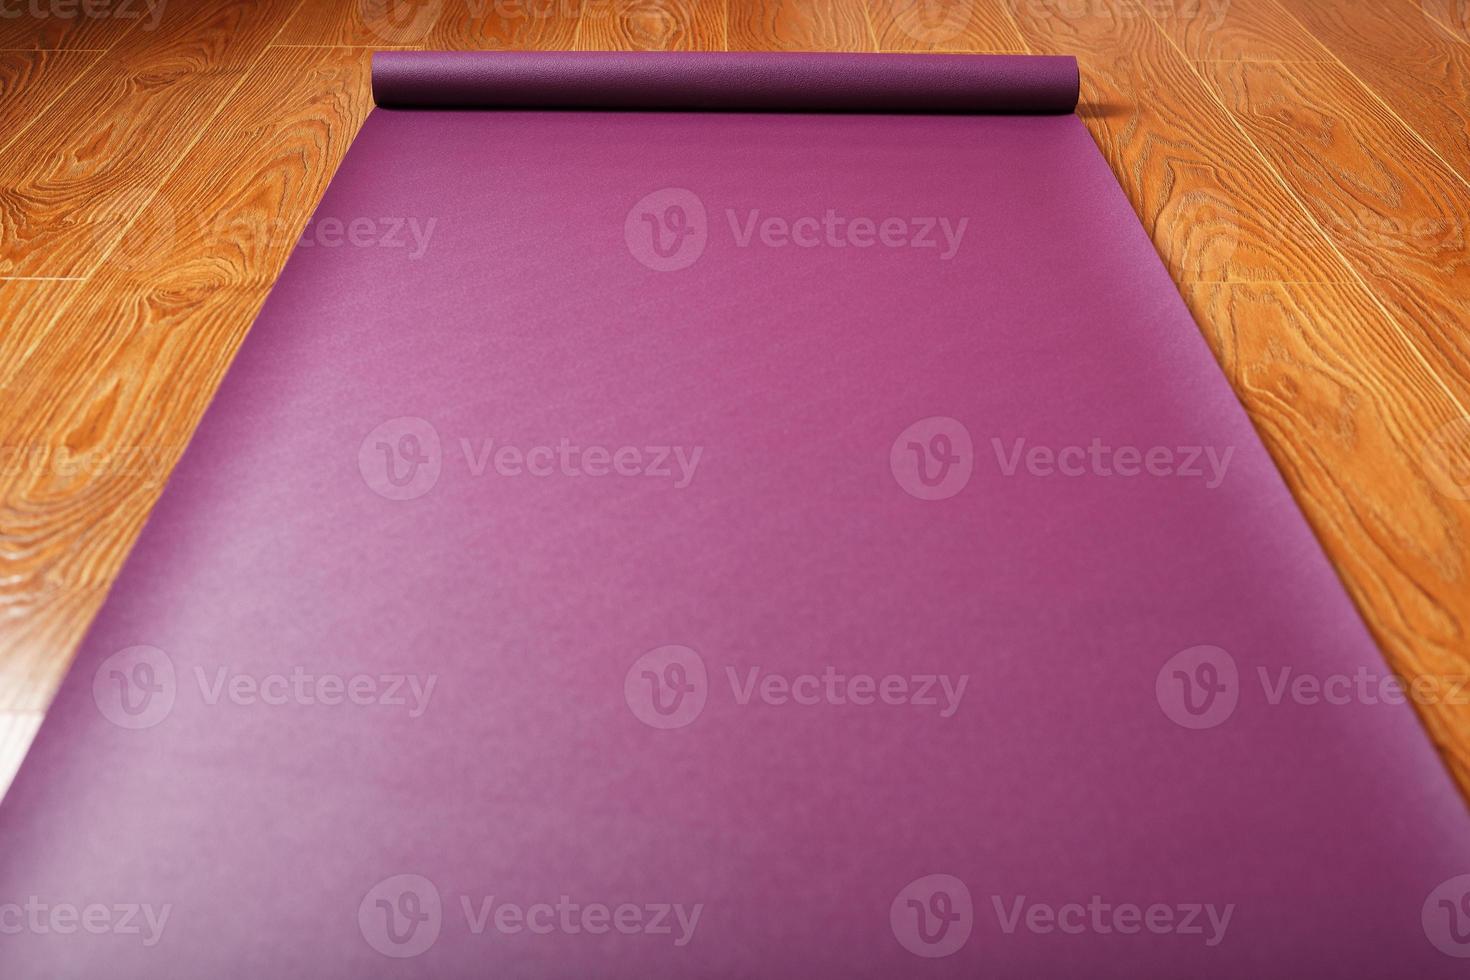 A lilac-colored yoga mat is spread out on the wooden floor with a Ganapati figurine photo